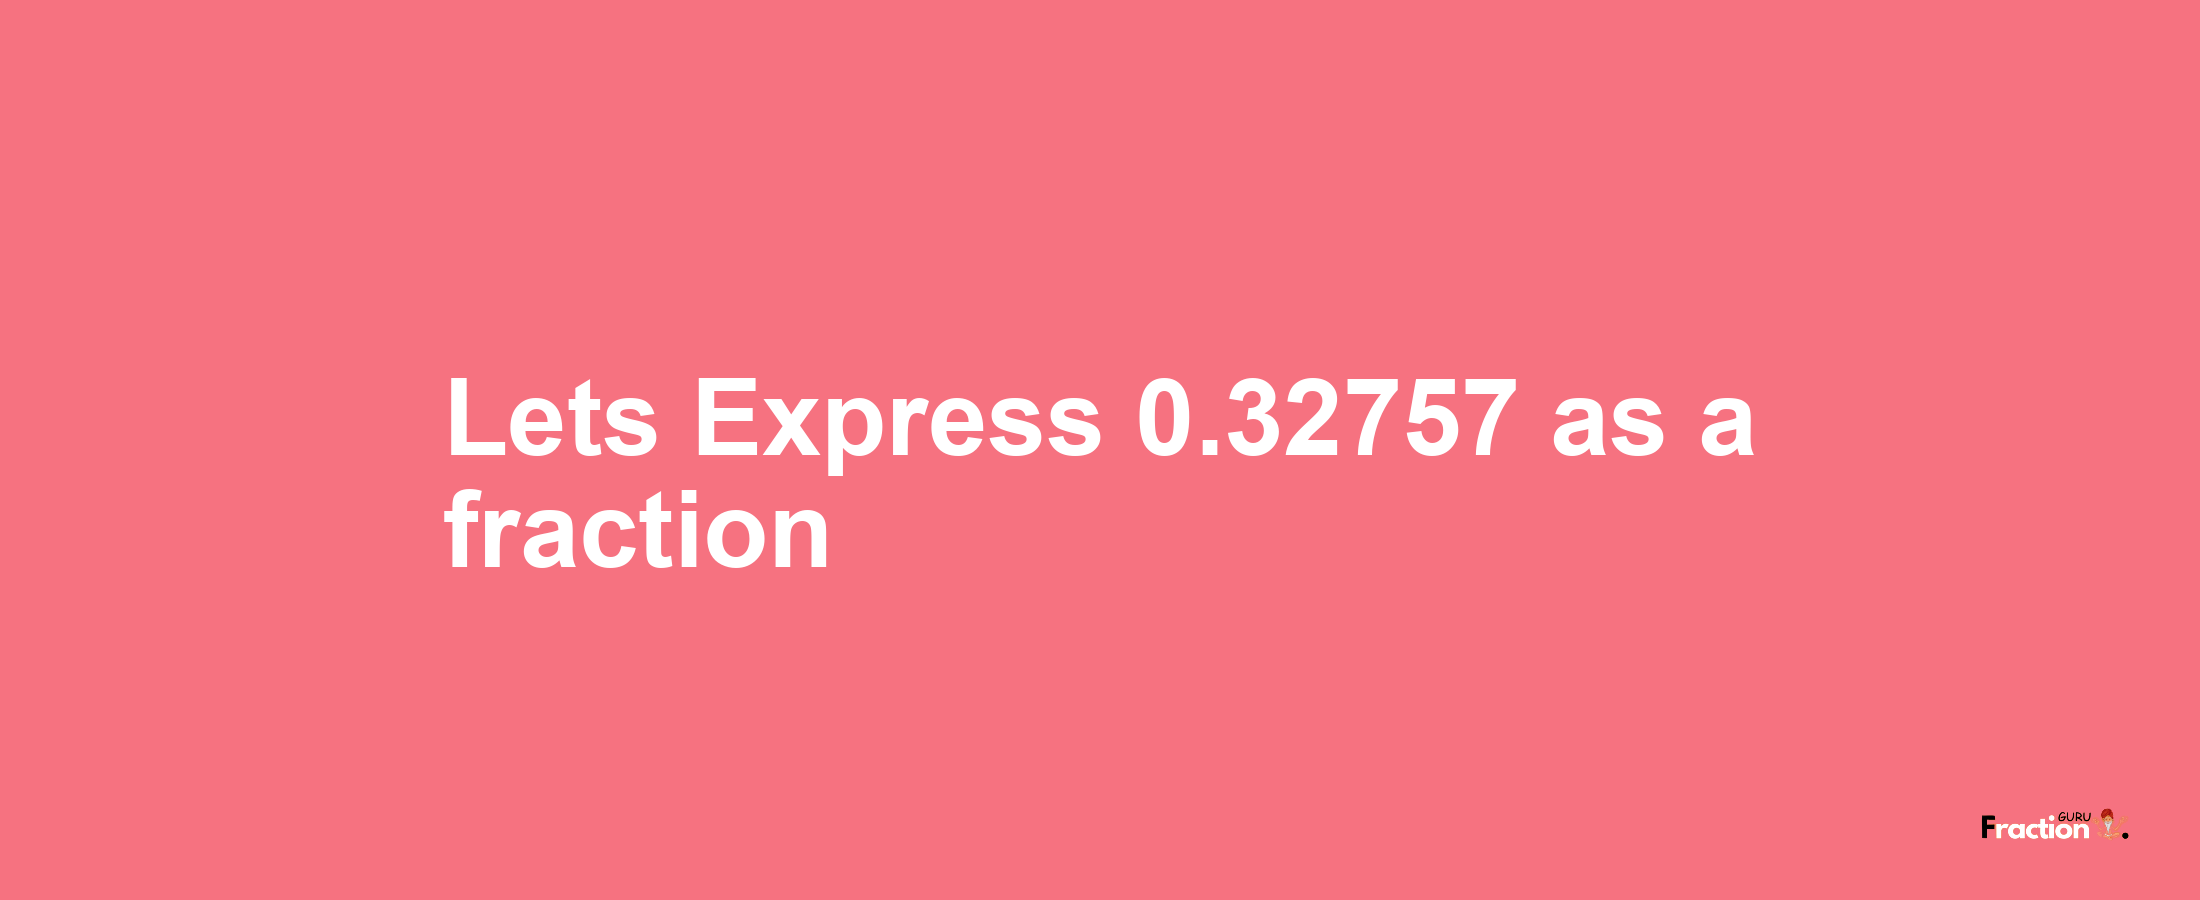 Lets Express 0.32757 as afraction